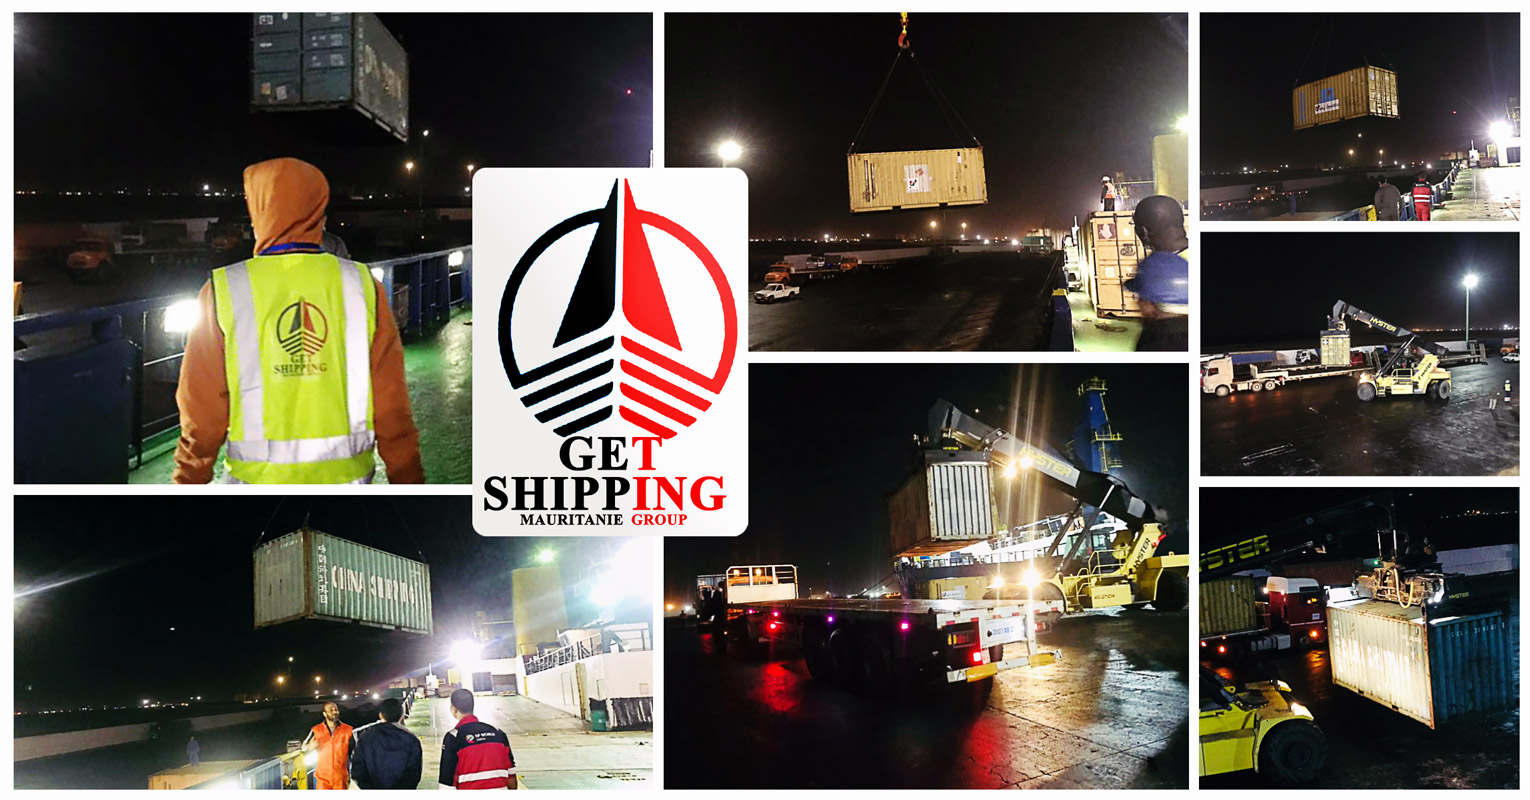 Get Shipping Successfully Performed as Agency, Customs Clearance, Stevedoring, and Transportation Operations in Nouakchott Mauritania for mv Jabal Ali 5